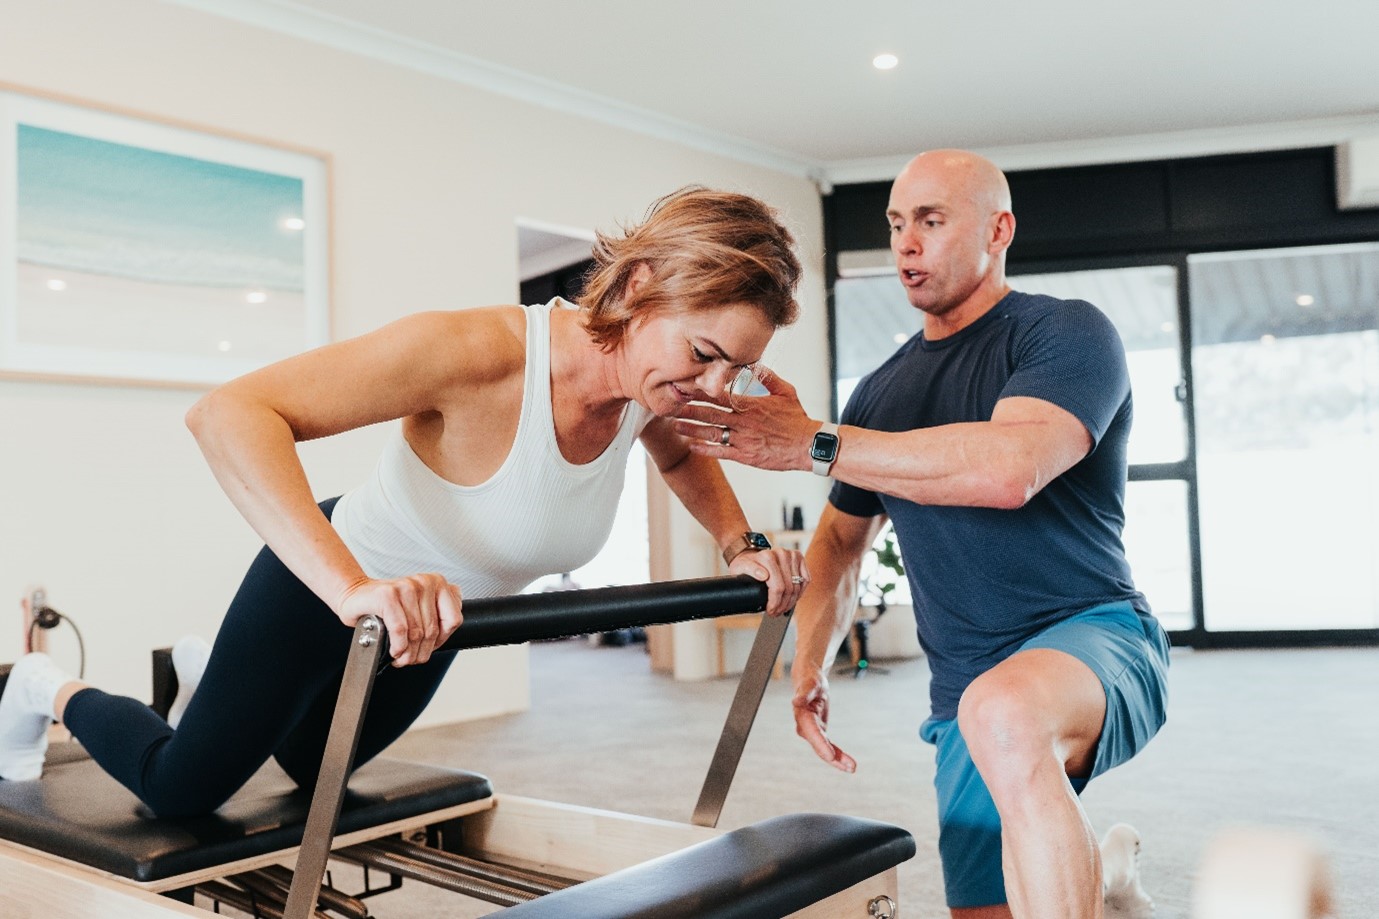 Reformer pilates: what is it and what are the benefits?